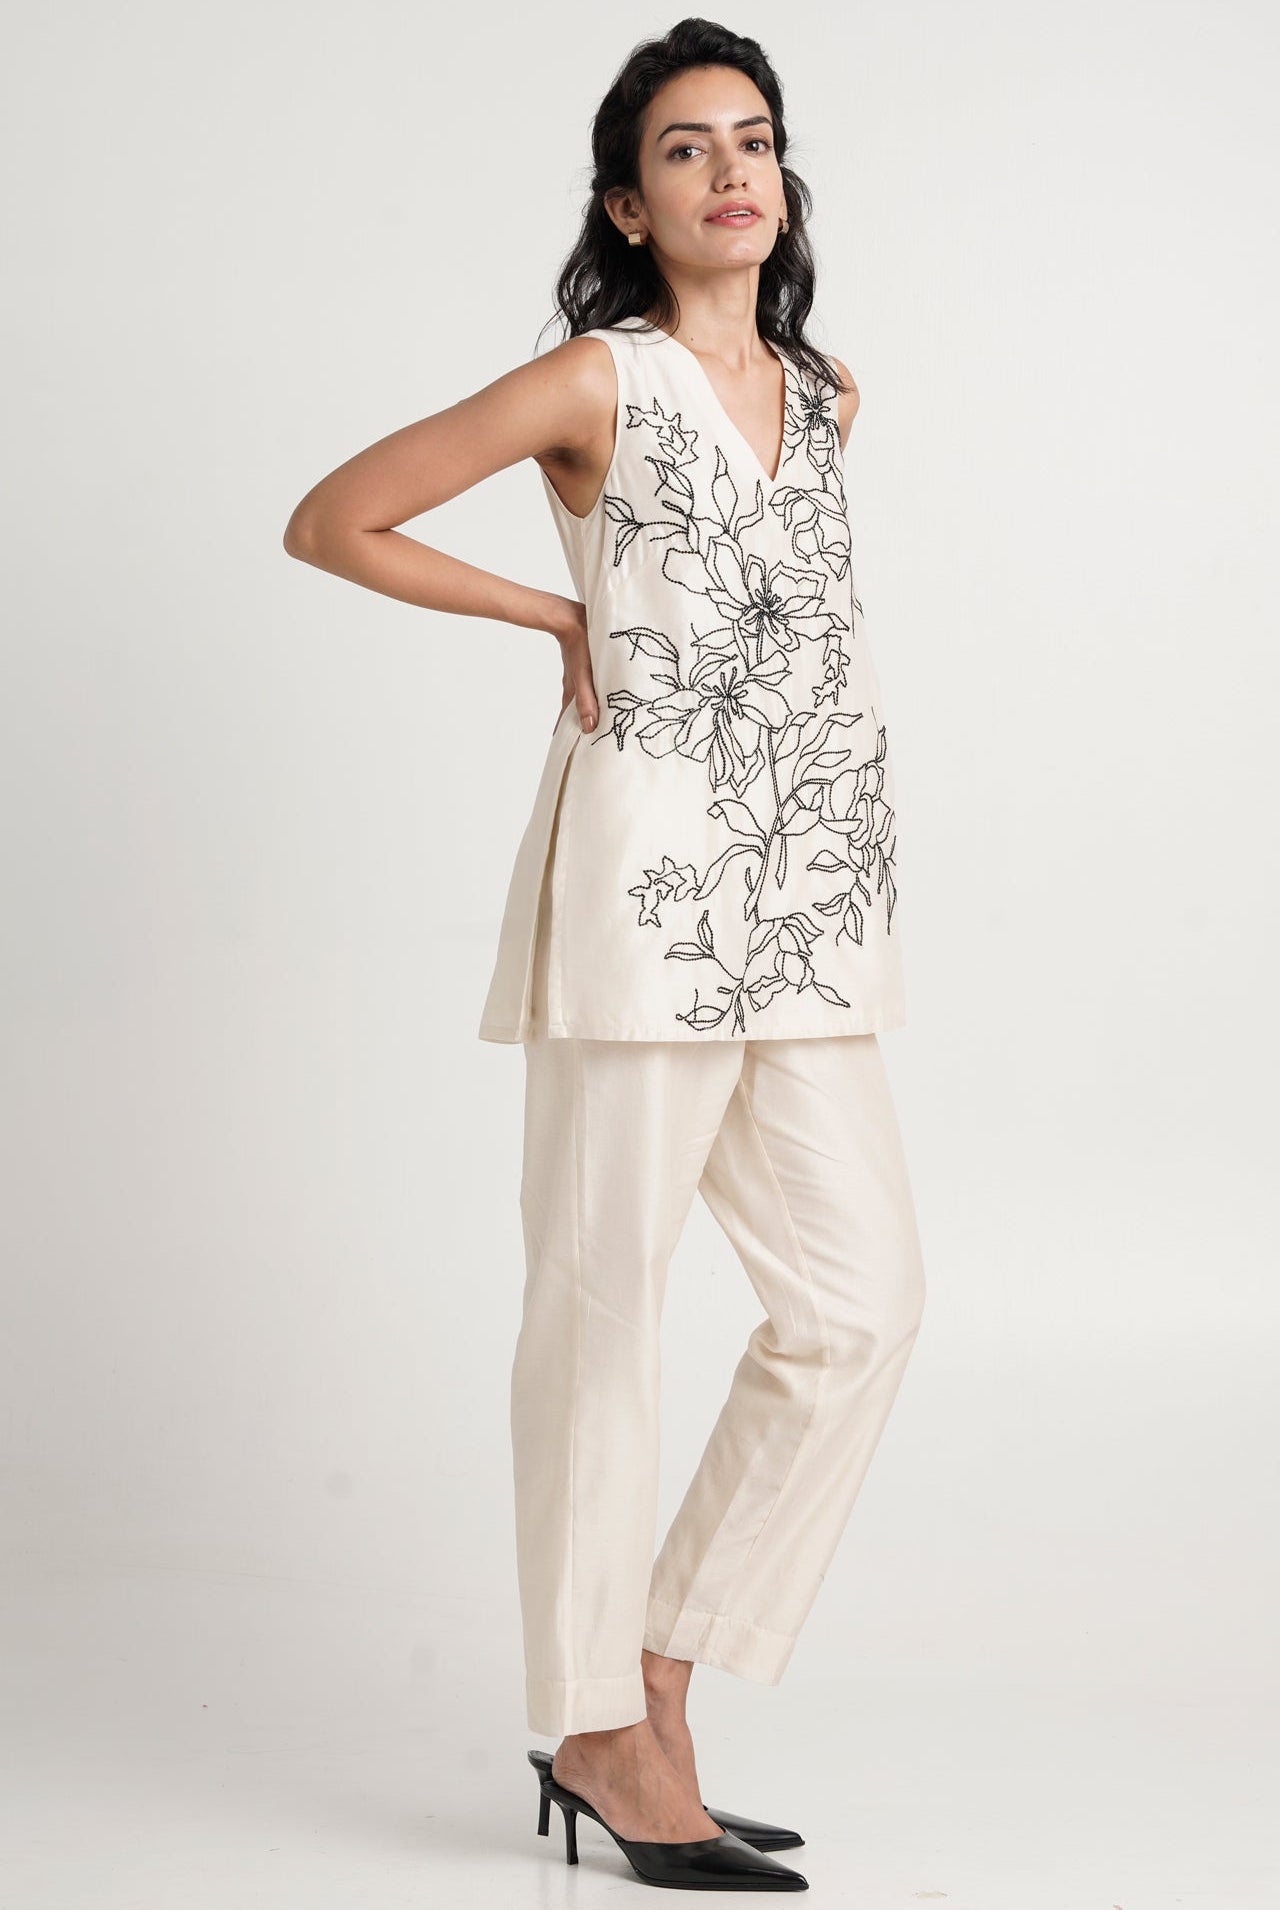 Irwin - Sequinned Sleeveless Top + Pants - CiceroniCo-ord SetMadder Much